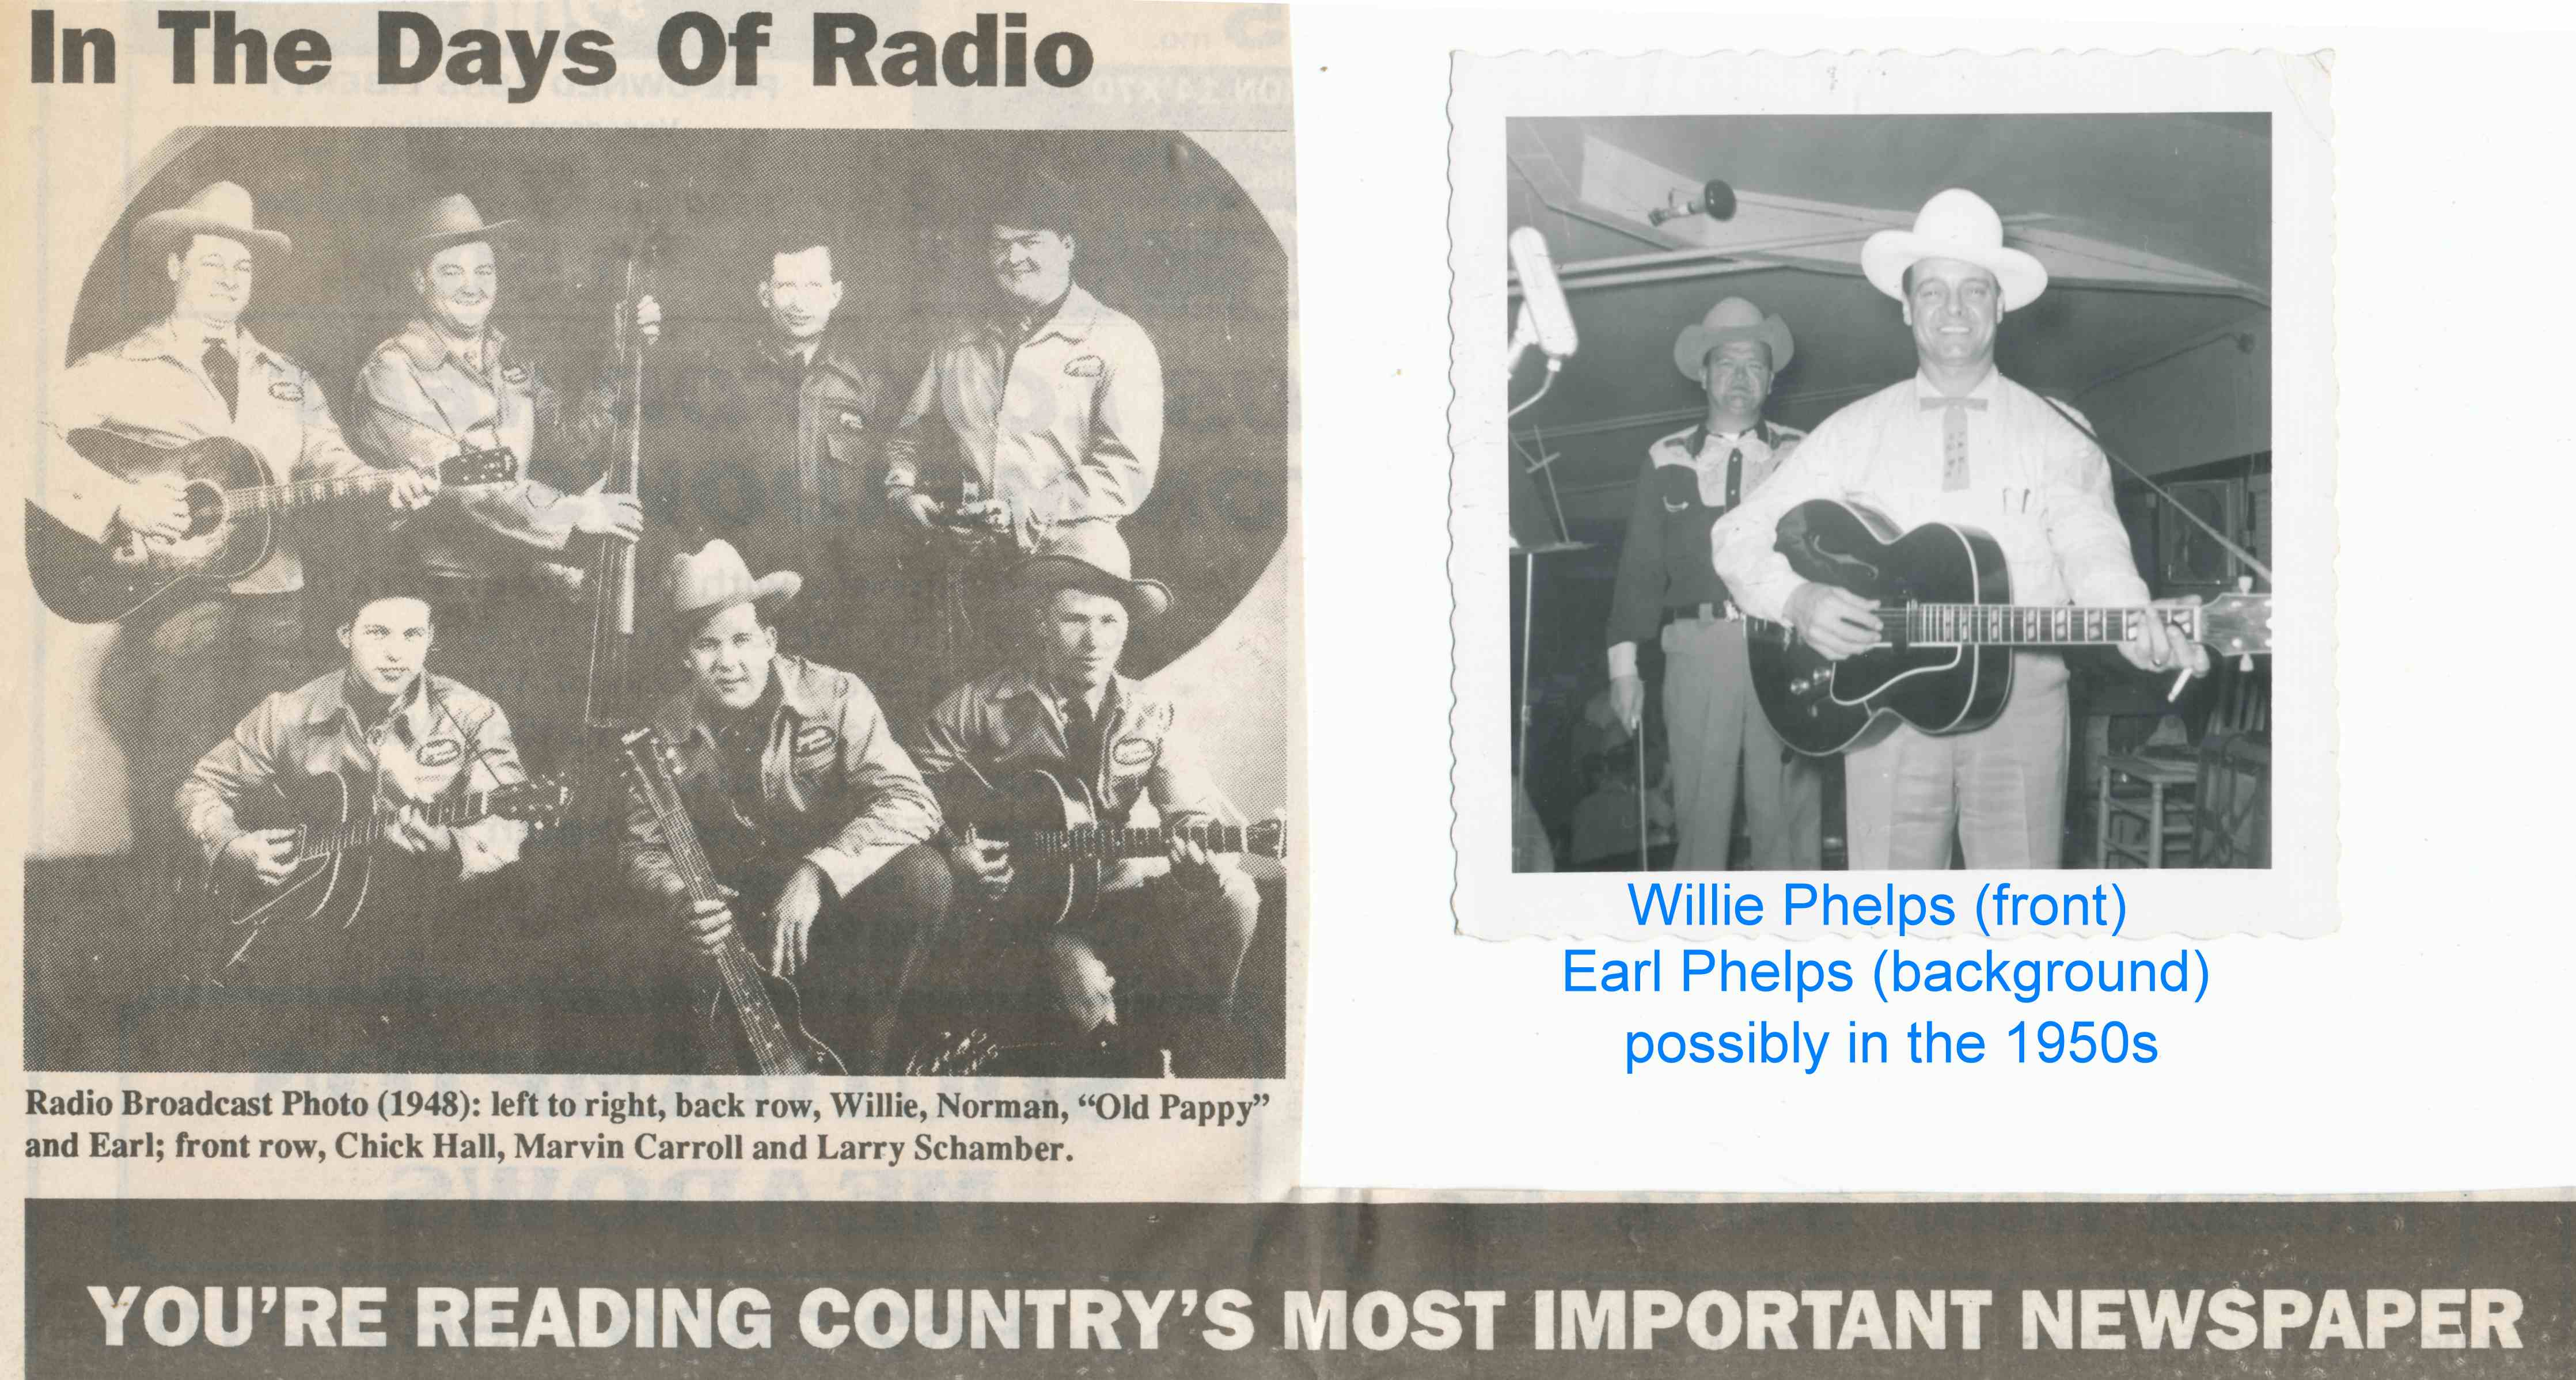 Willie, Norman and Earl Phelps, Old Pappy, Chuck Hall, Marvin Carroll, Larry Schamber